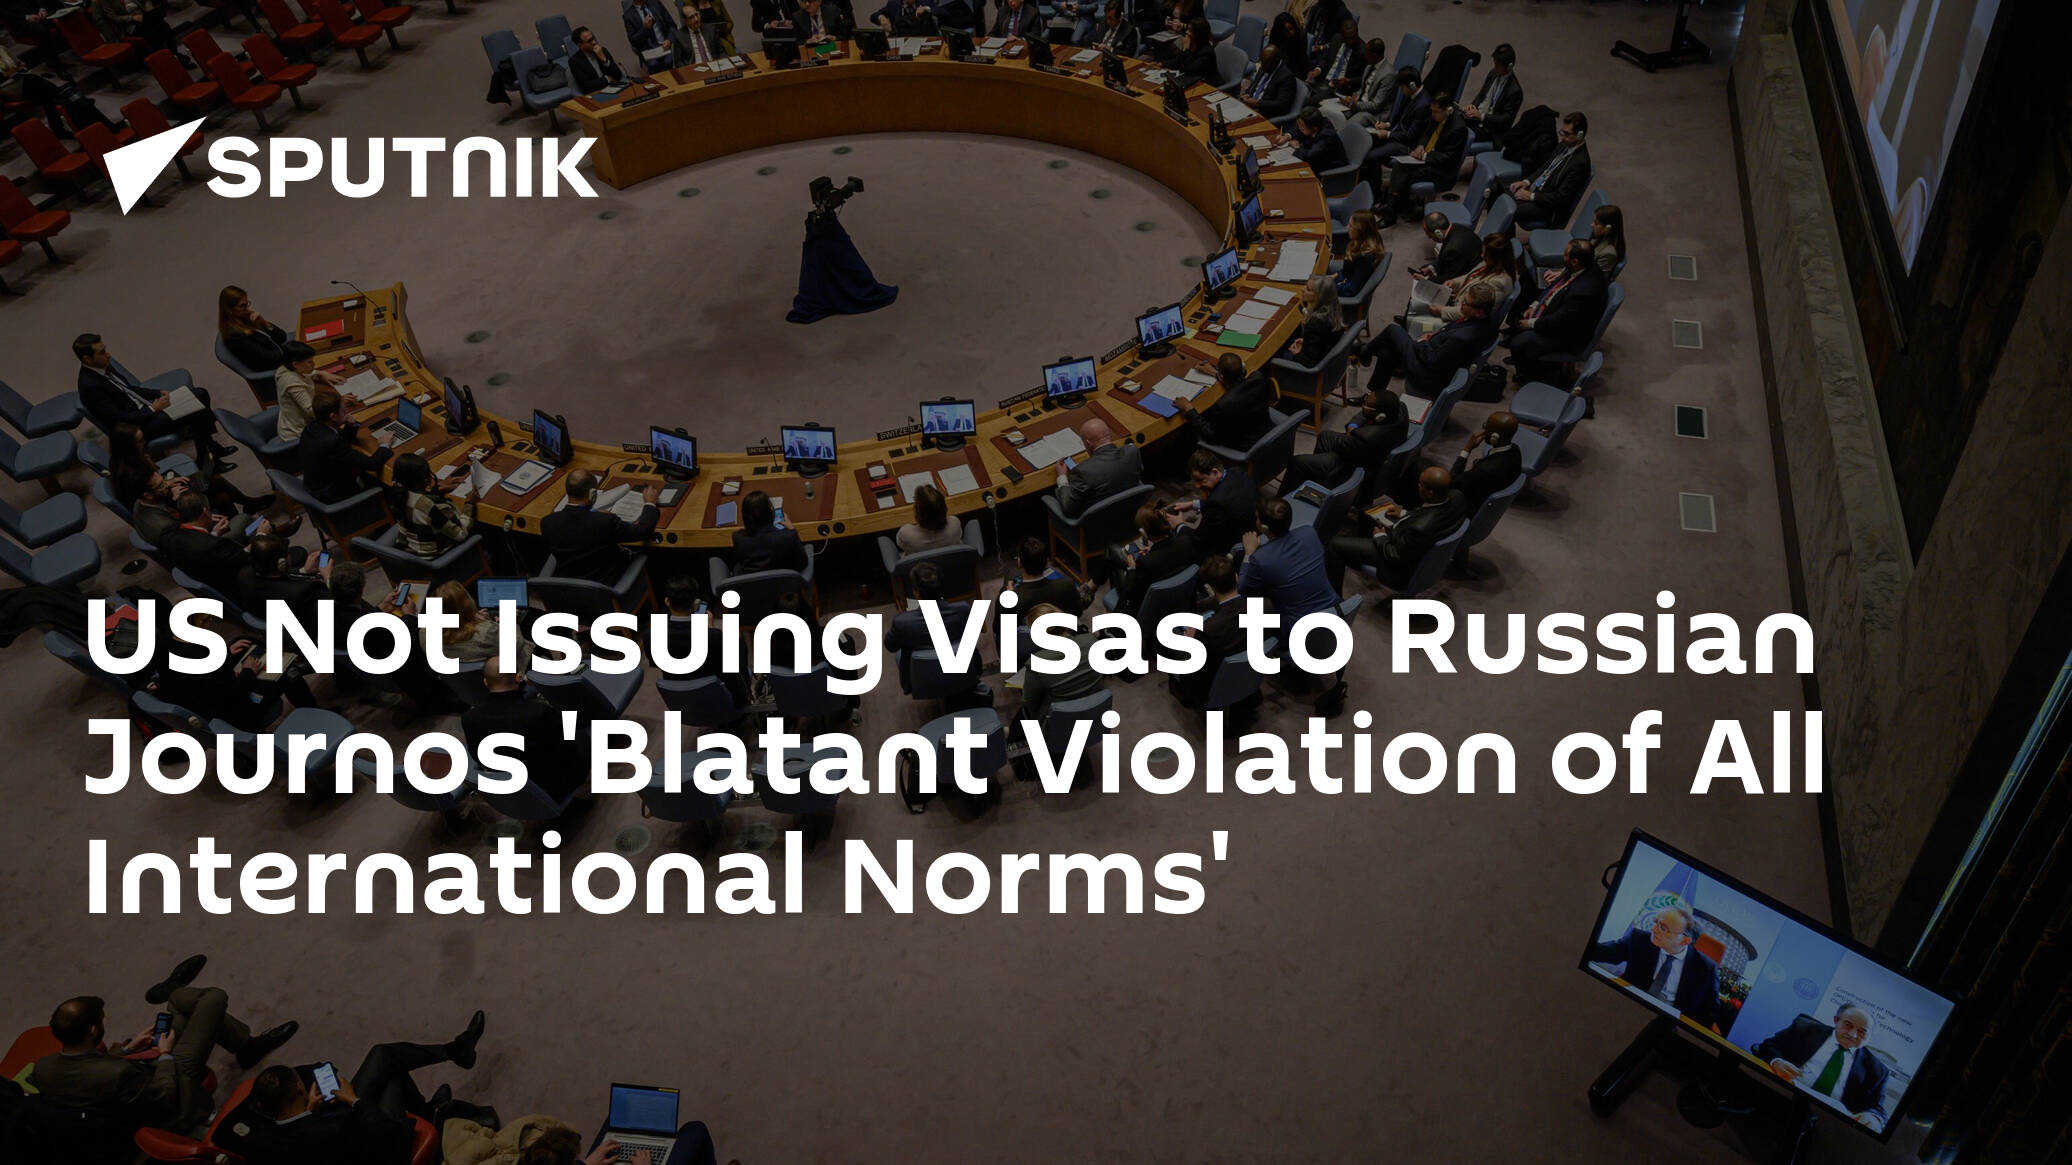 US Not Issuing Visas to Russian Journos 'Blatant Violation of All International Norms'